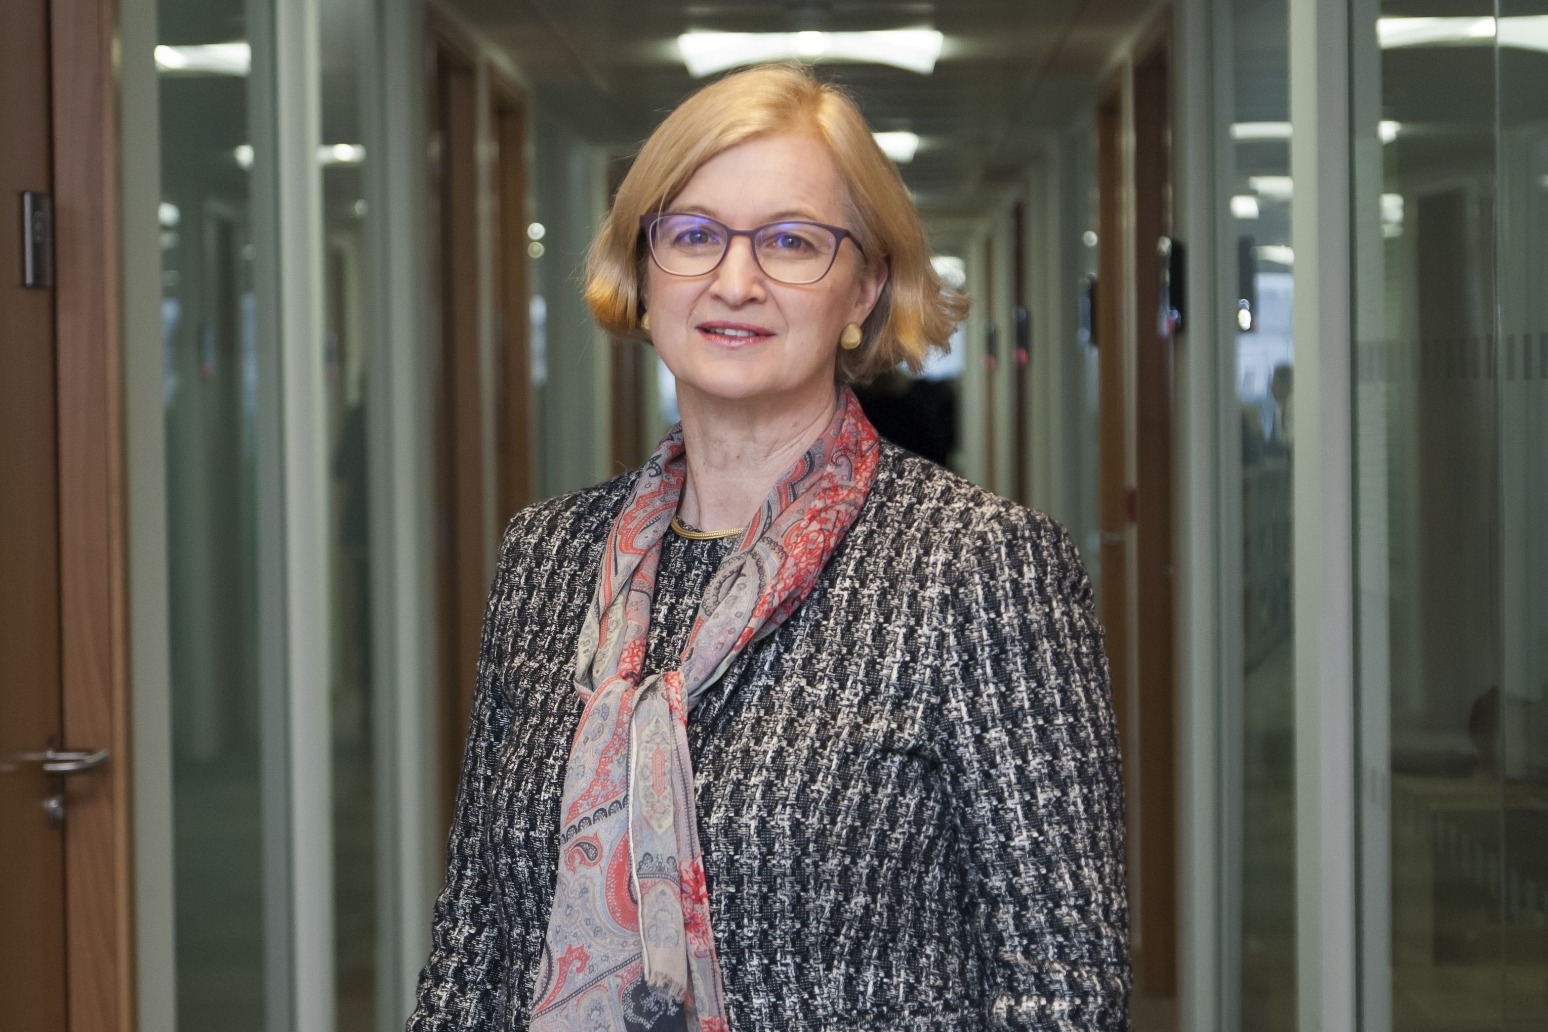 Most parents arent equipped to home educate says Amanda Spielman